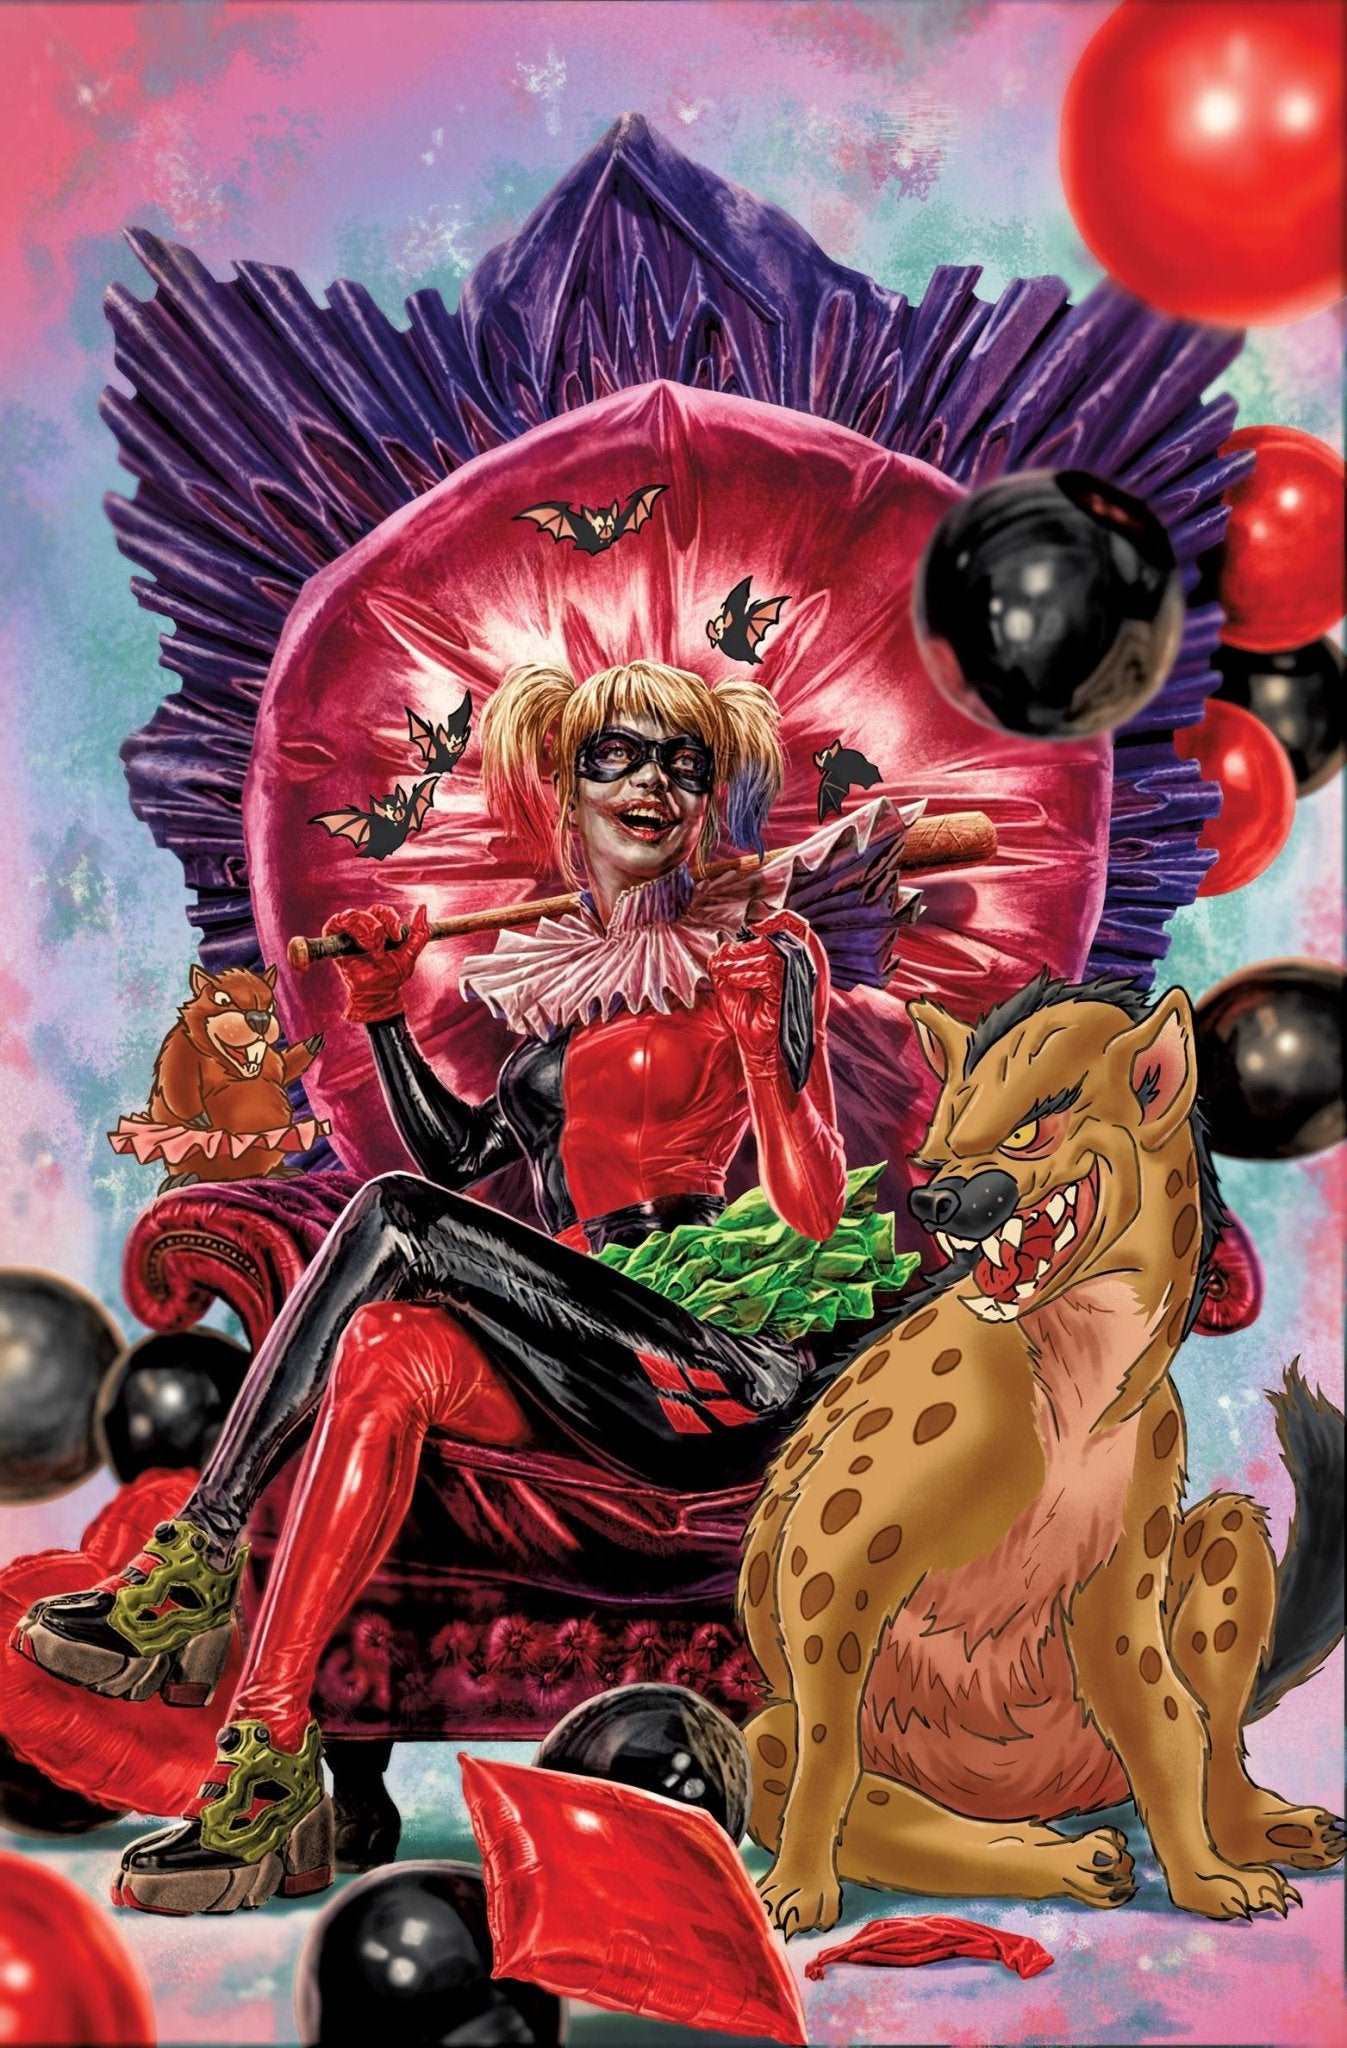 HARLEY QUINN 30TH ANNIVERSARY SPECIAL #1 - The Comic Construct